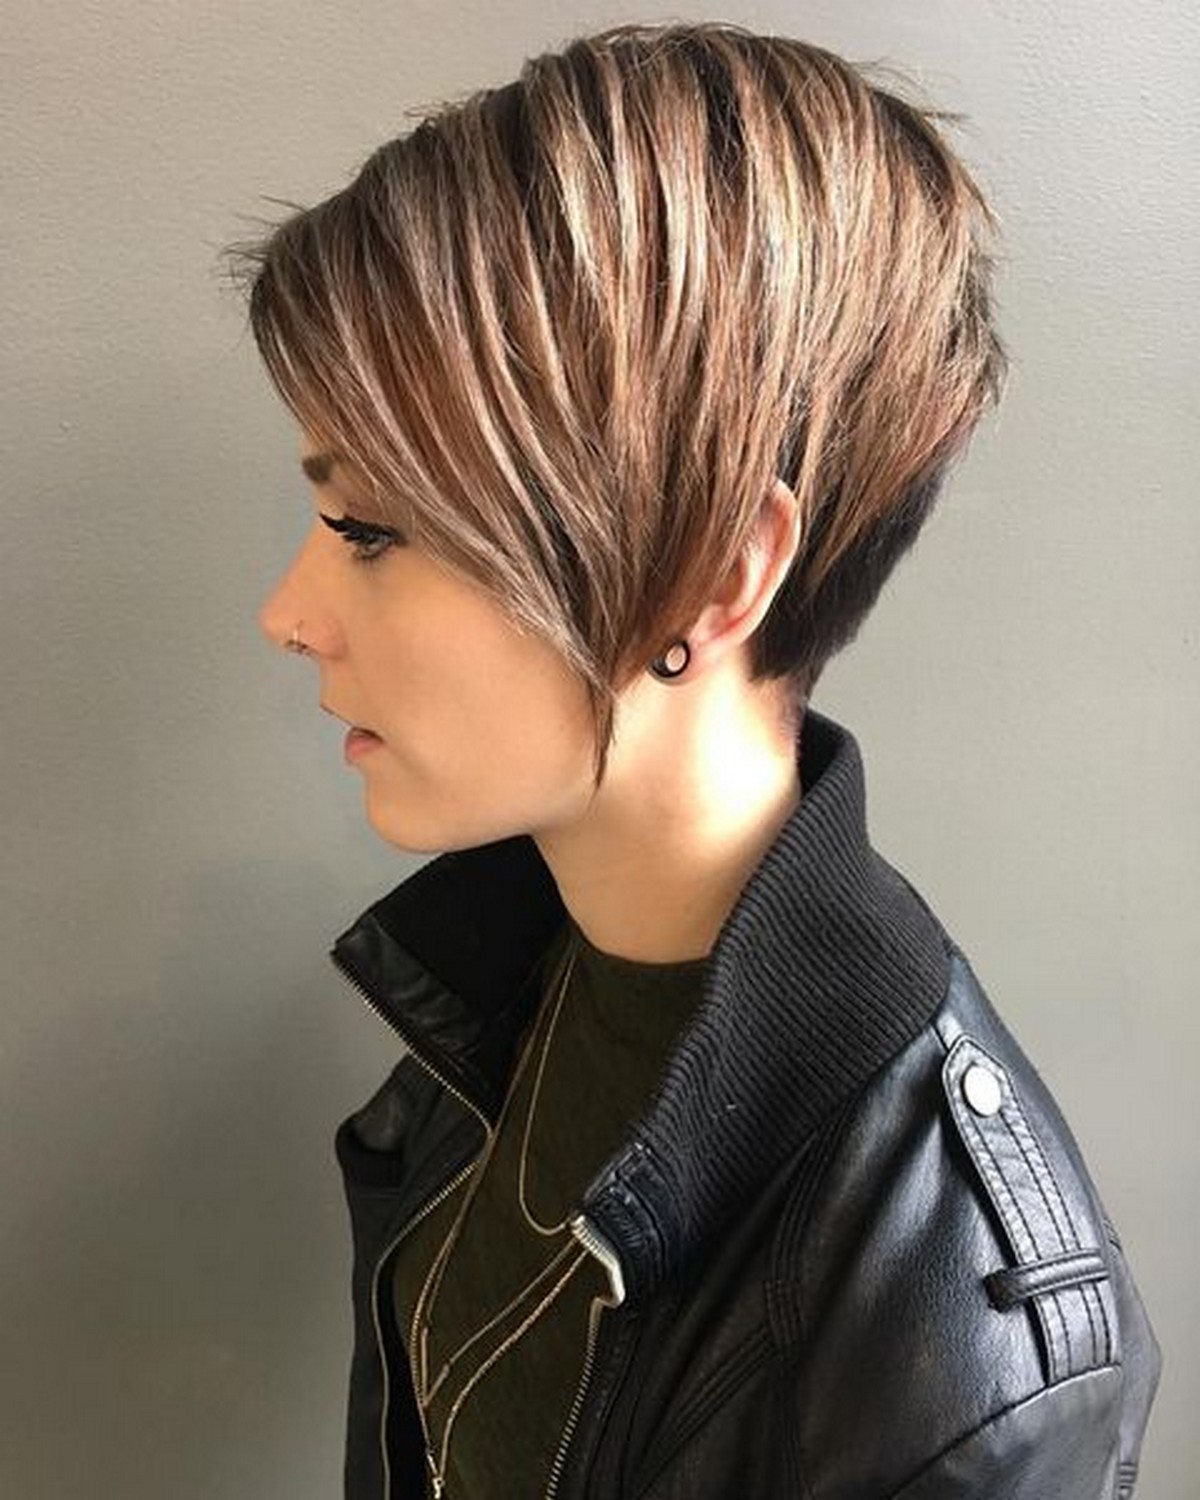 19. Tapered Textured And Highlighted Pixie